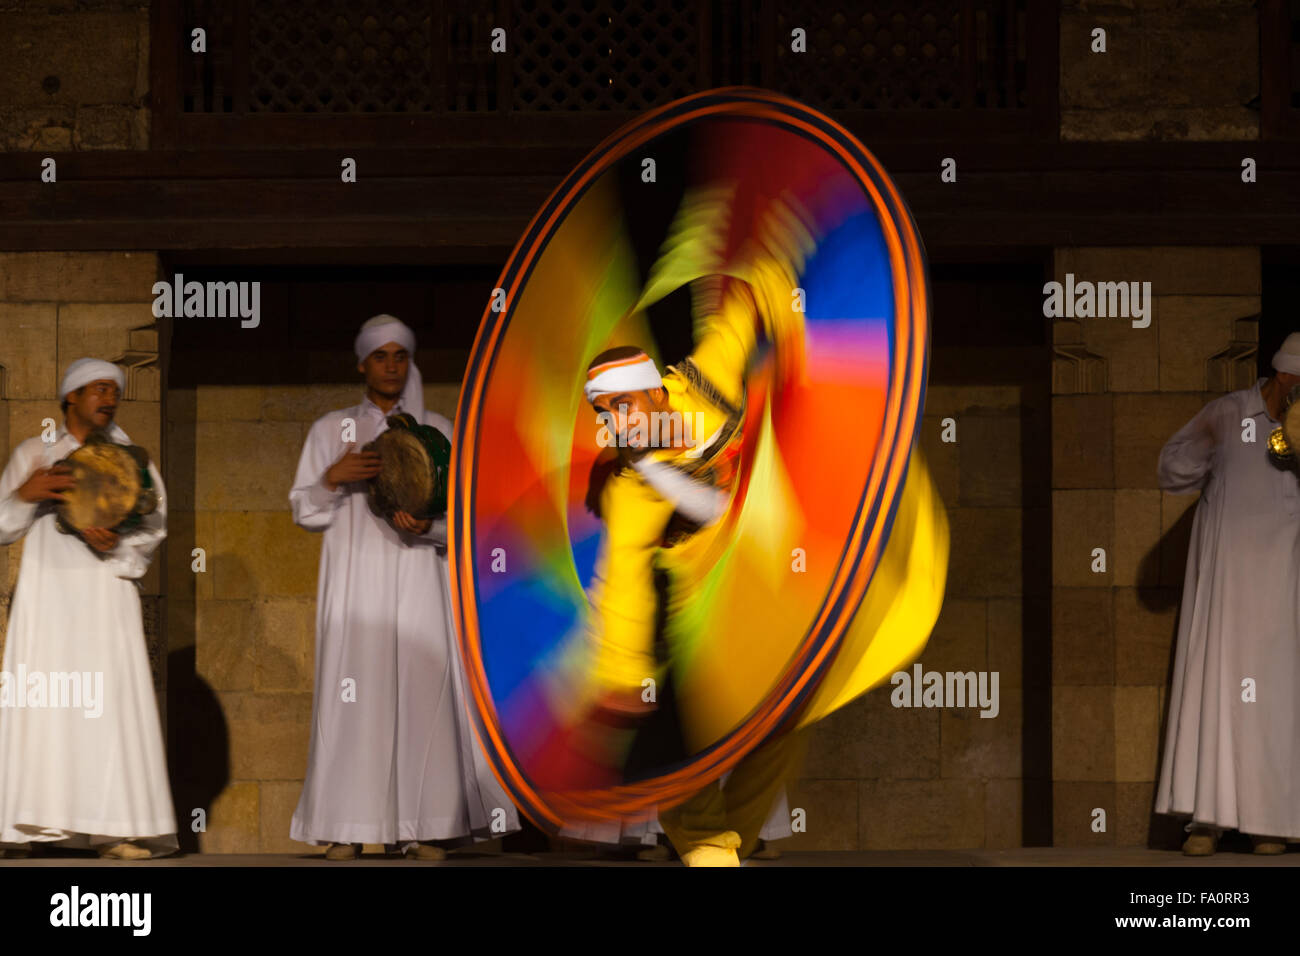 Male Egyptian Sufi dancer in yellow spinning a colorful circular sheet during whirling dervish at open air courtyard performance Stock Photo